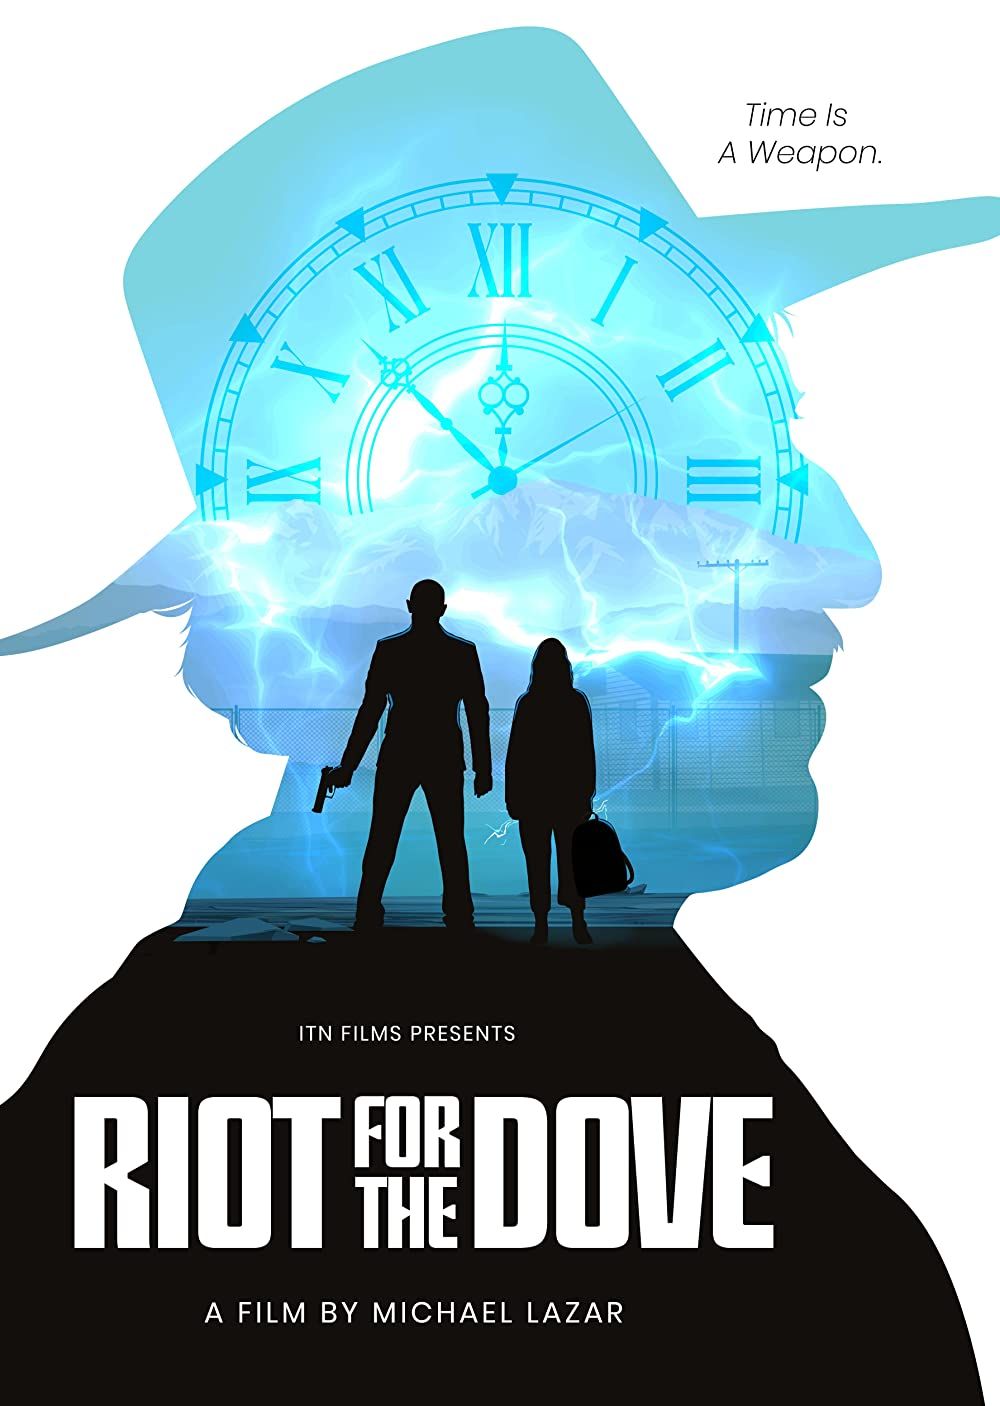 Riot for the dove 2022Tamil Unofficial Dubbed 1xBet